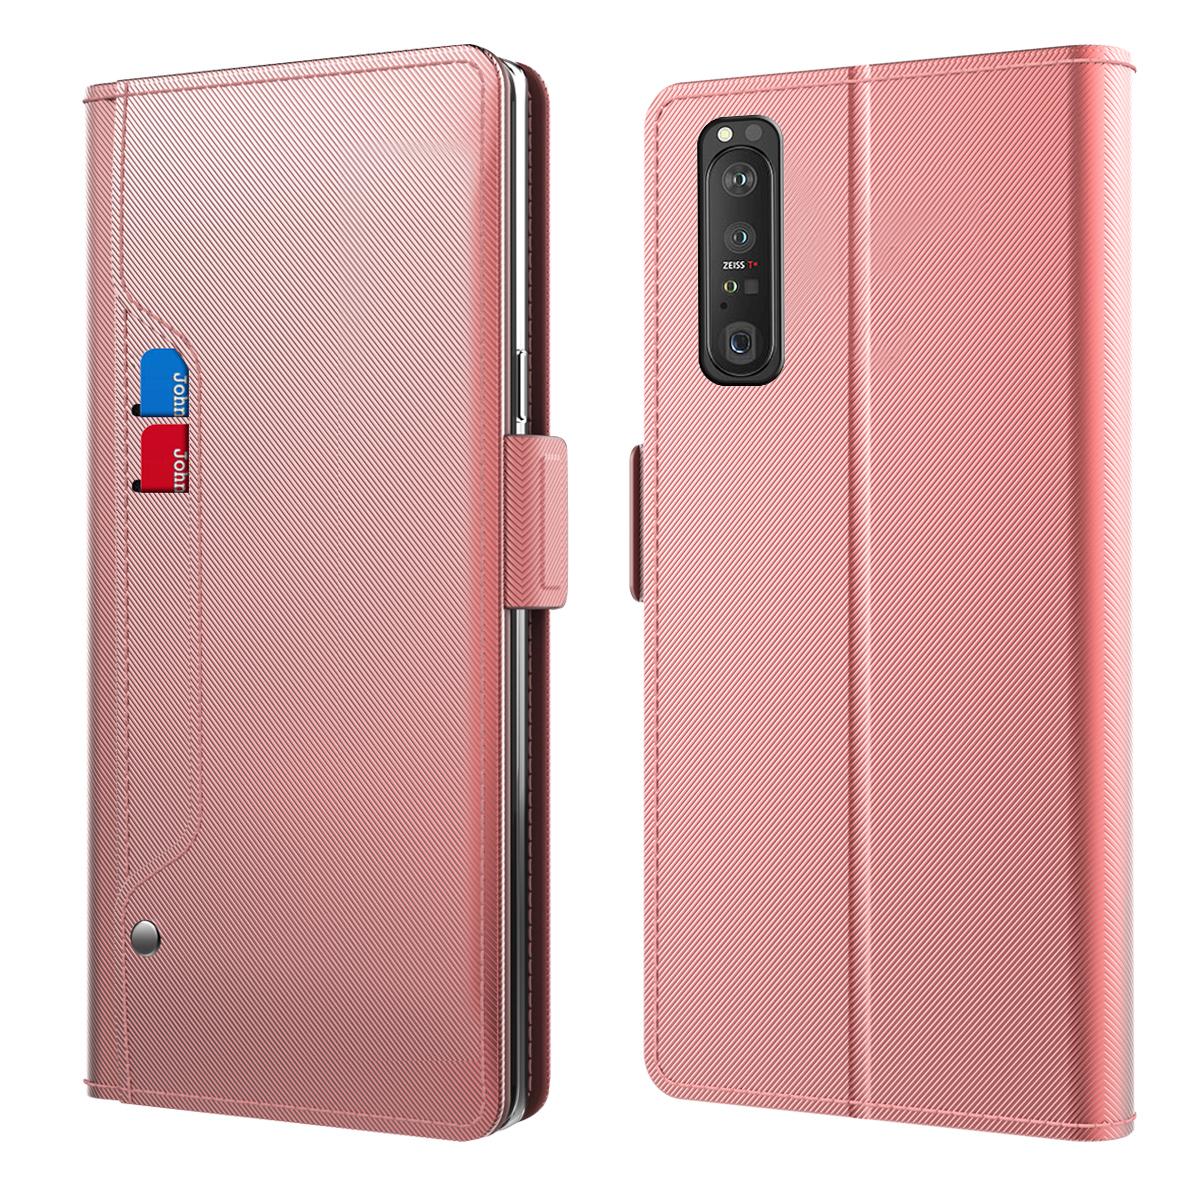 Sony Xperia 1 III Wallet Case Mirror Pink Gold